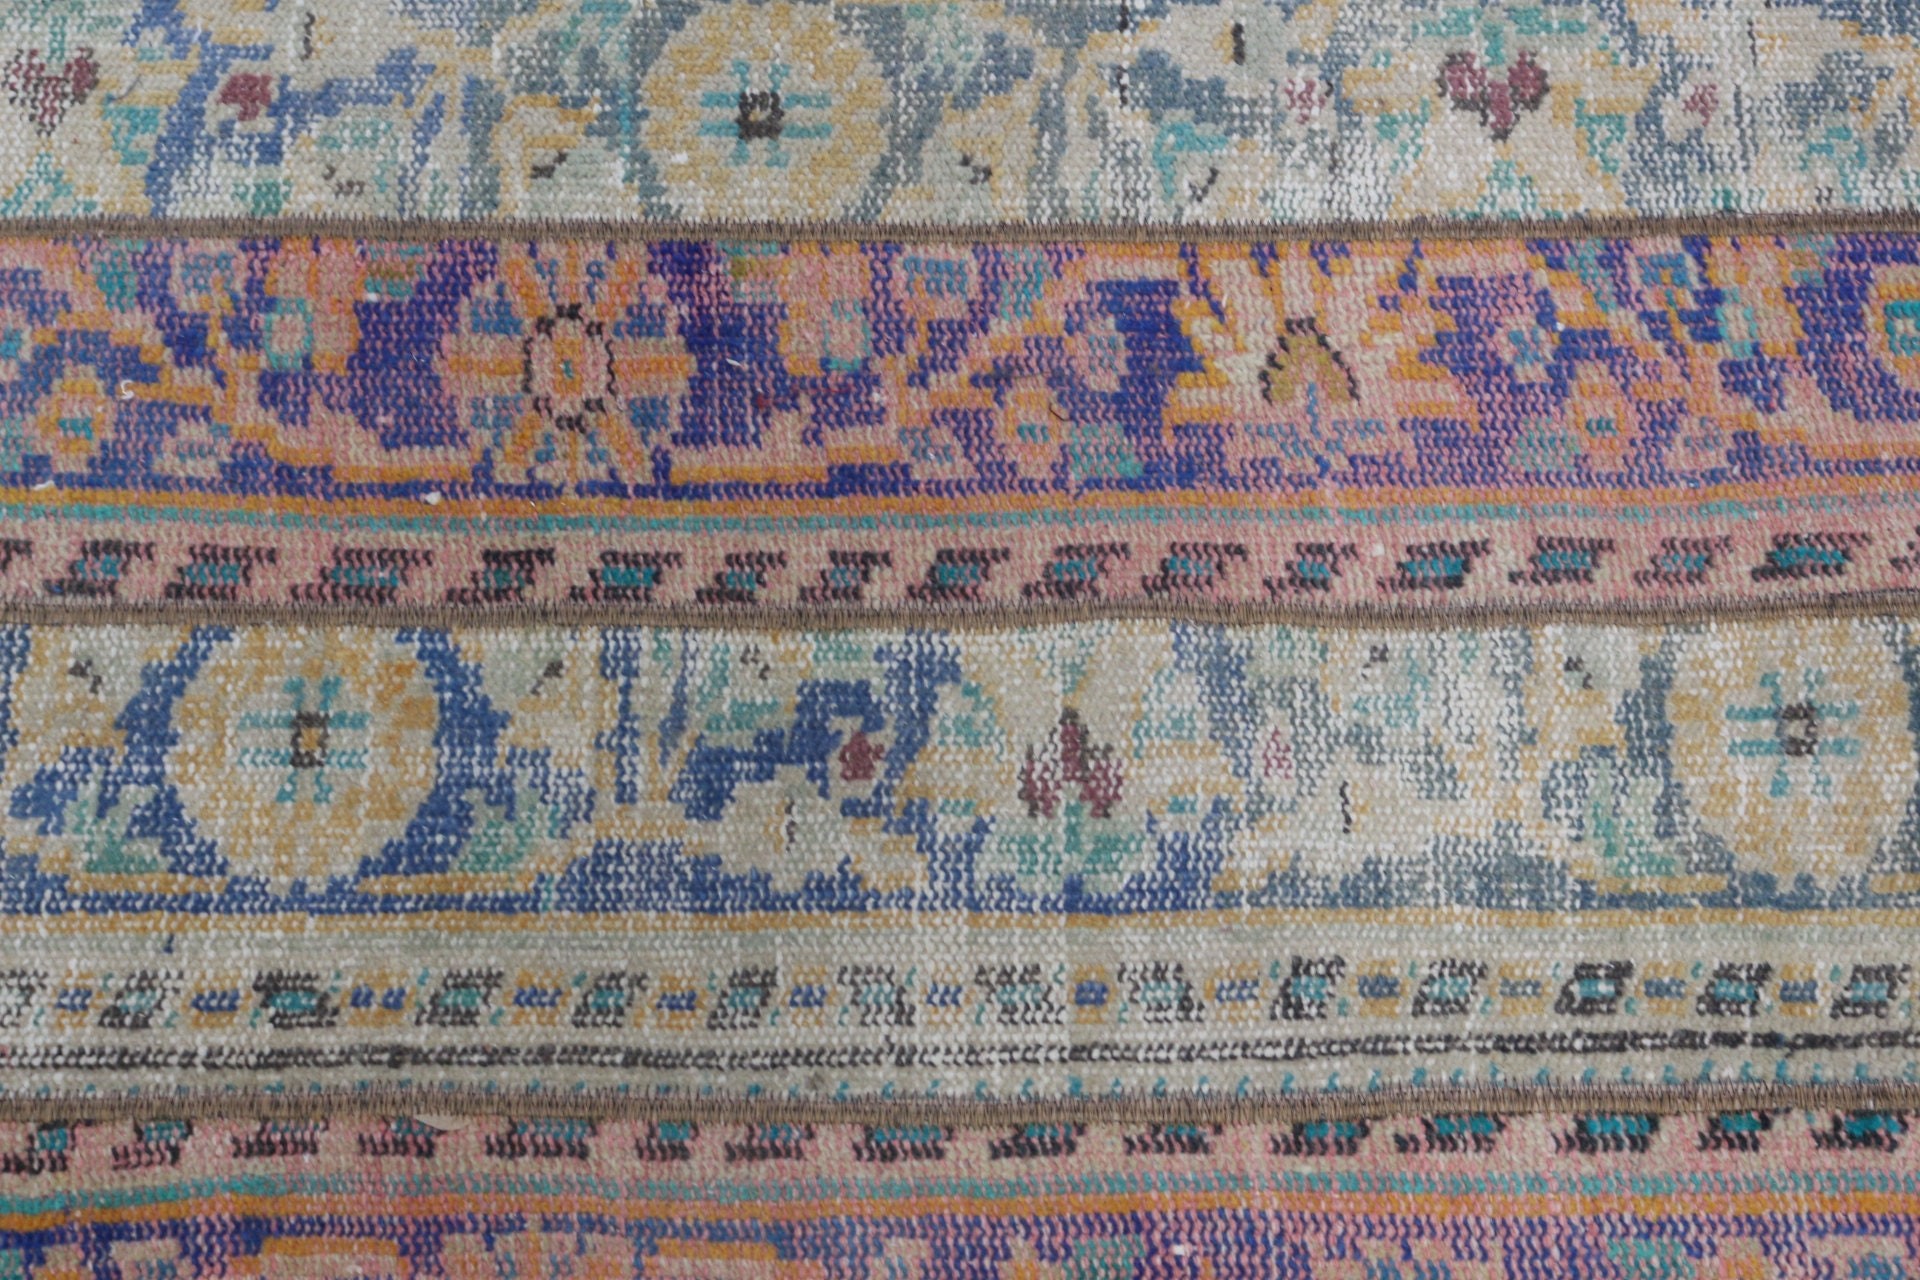 Turkish Rug, Vintage Rug, Blue Oushak Rugs, Bathroom Rug, Anatolian Rugs, Cool Rugs, Kitchen Rug, 2.4x3.1 ft Small Rug, Rugs for Entry